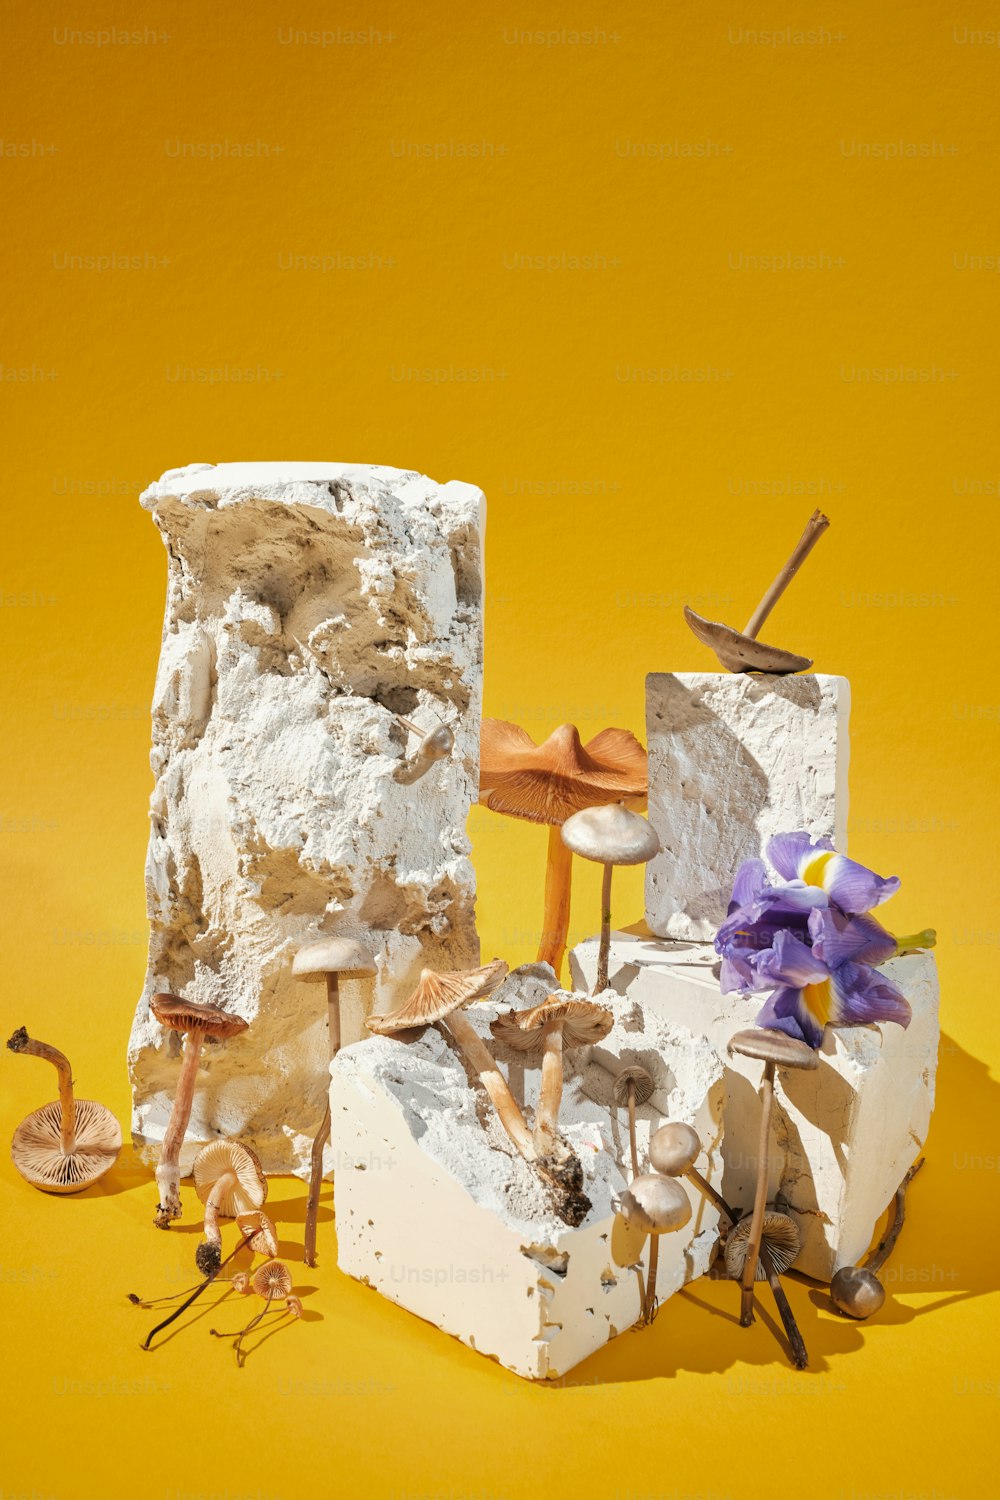 a sculpture of a rock with mushrooms and mushrooms on it